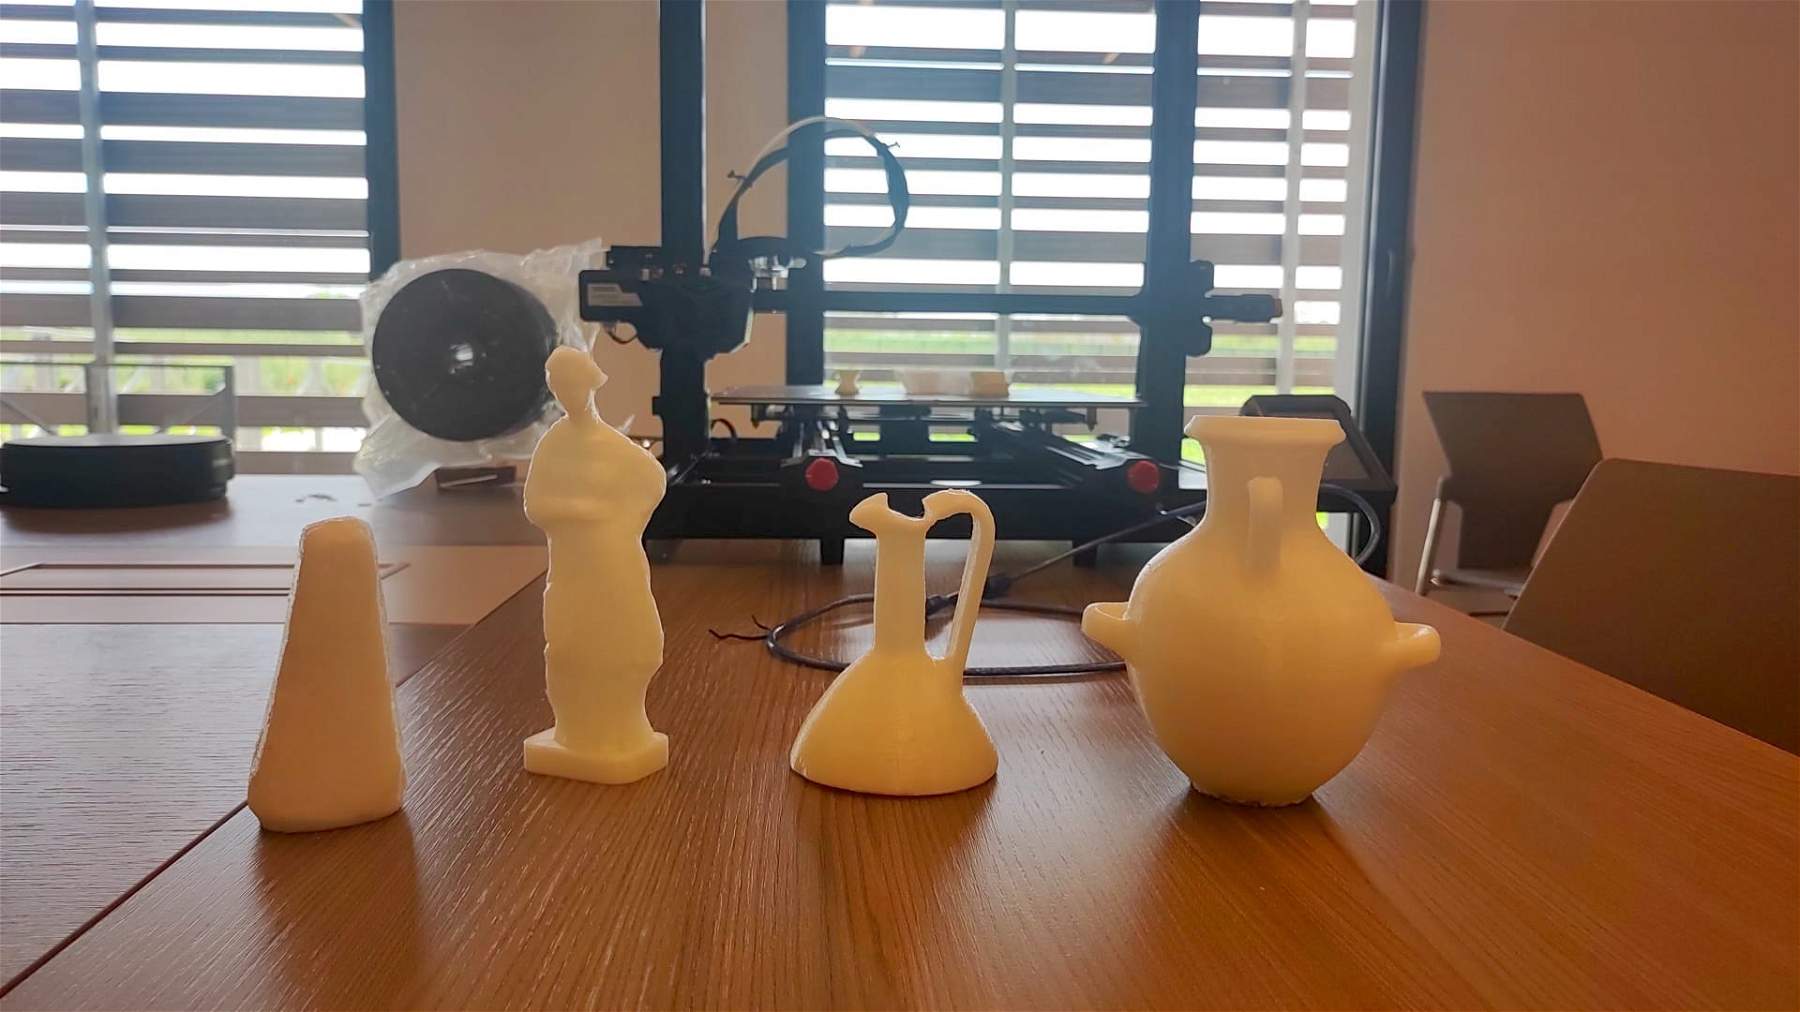 Sybaris, students teach inmates 3D printing to reproduce archaeological finds